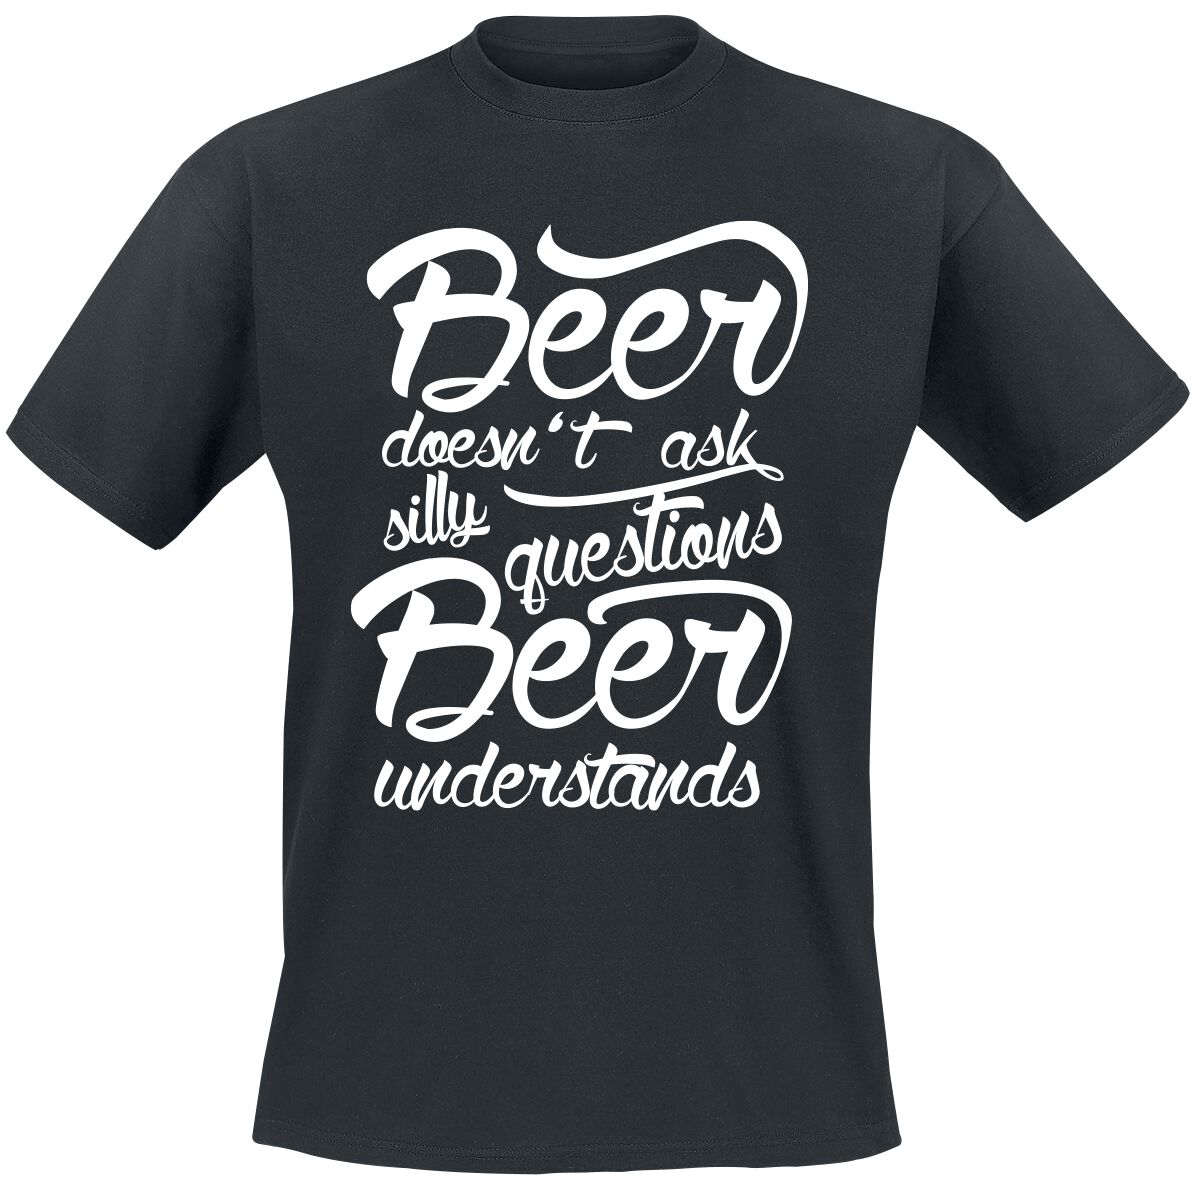 Image of T-Shirt Magliette Divertenti di Alcohol & Party - Beer doesn't ask silly questions - Beer understands - M a 3XL - Uomo - nero